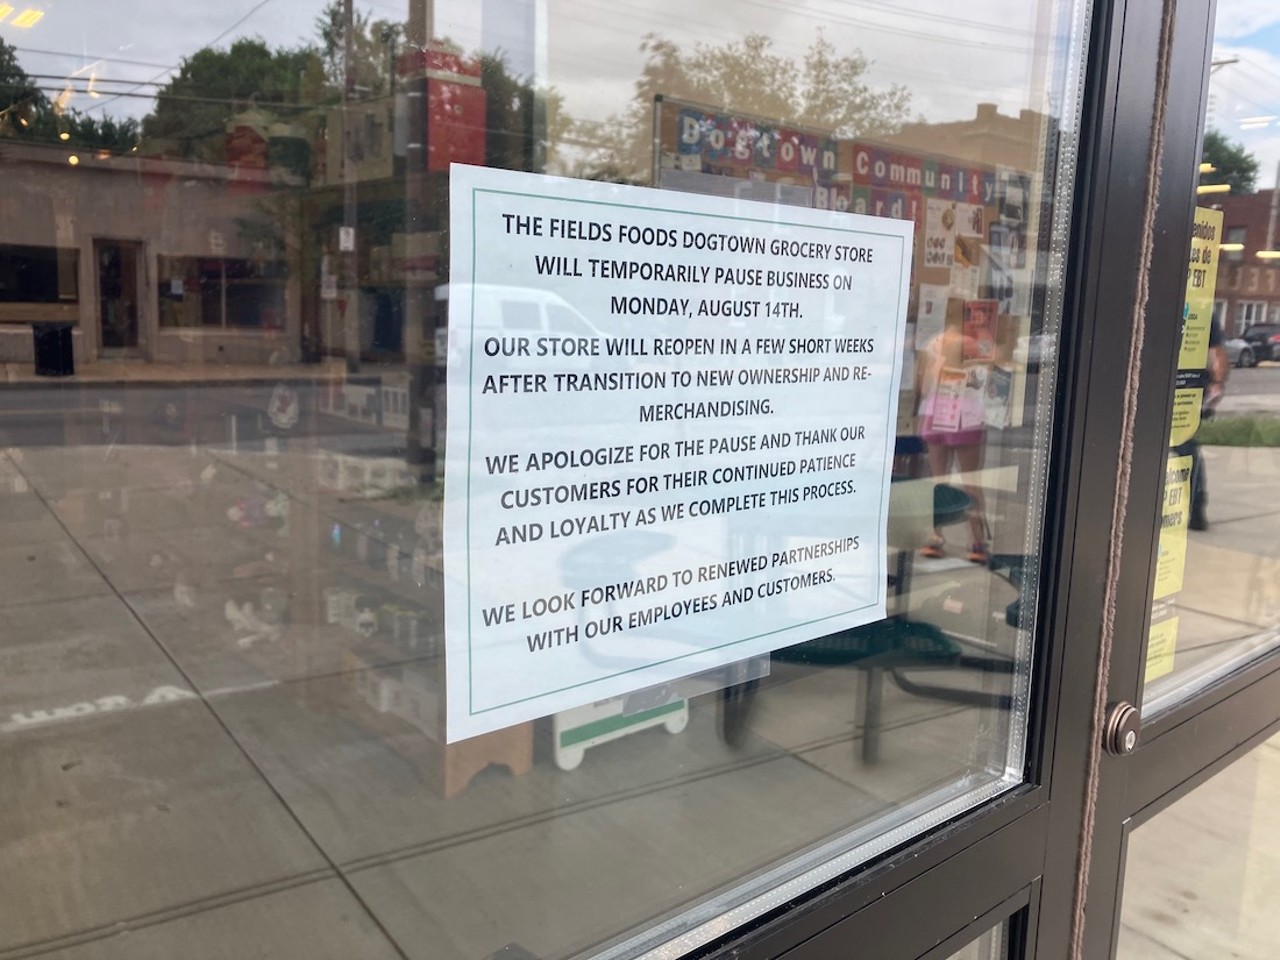 Doors were locked around 11 a.m. and this sign was posted on the door of the Dogtown store.